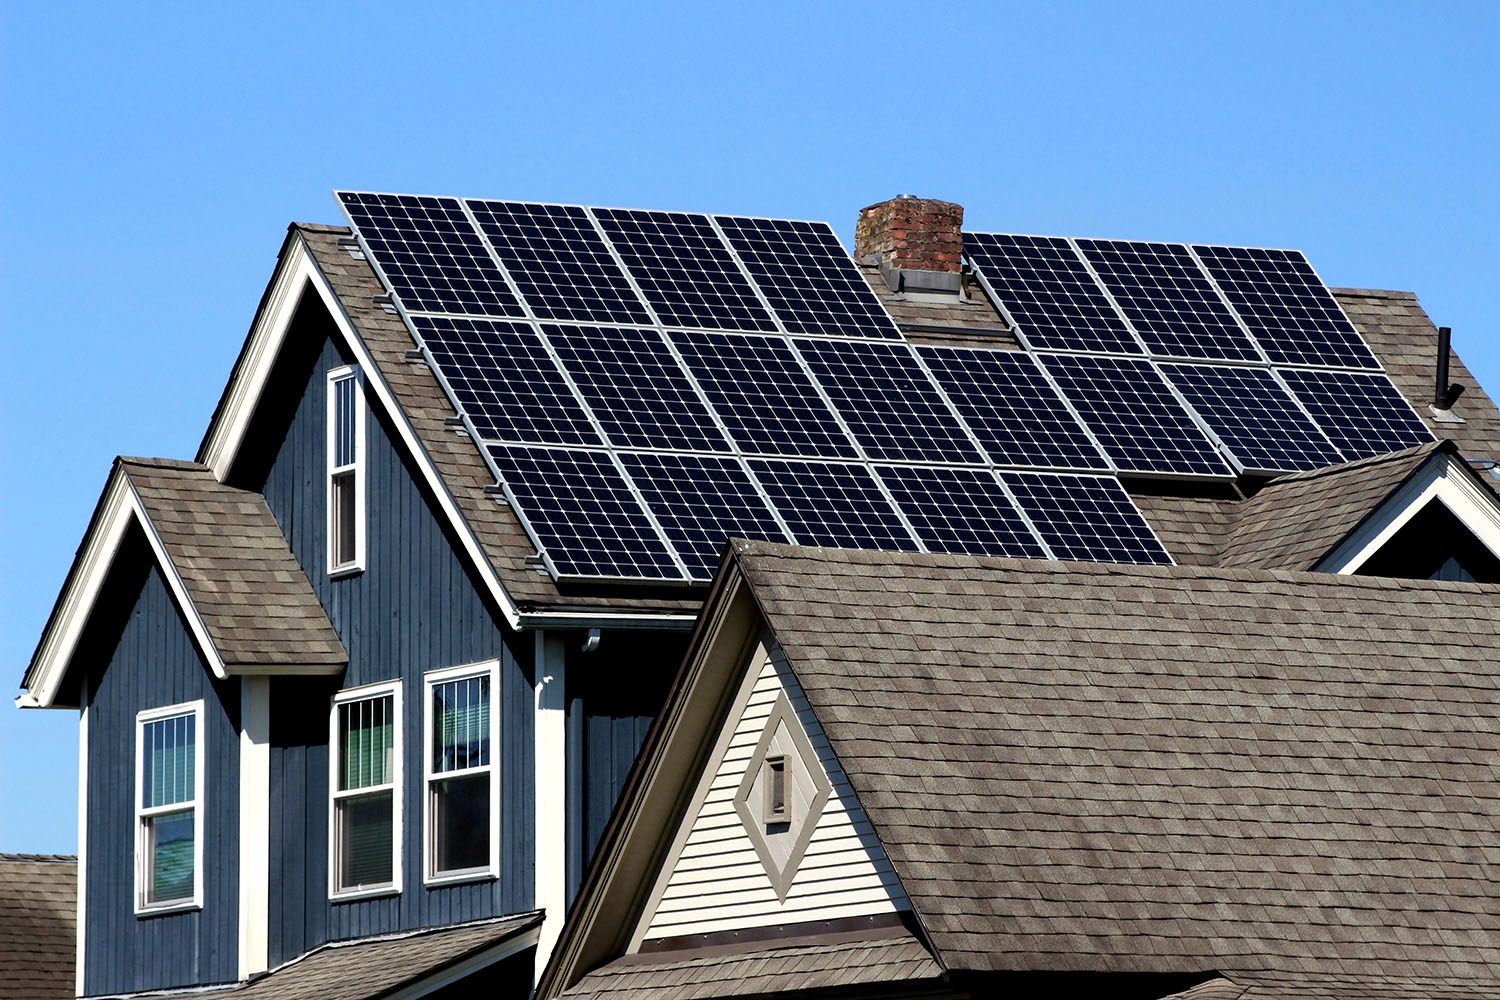 Solar Panels installed and in use on the roof of a home